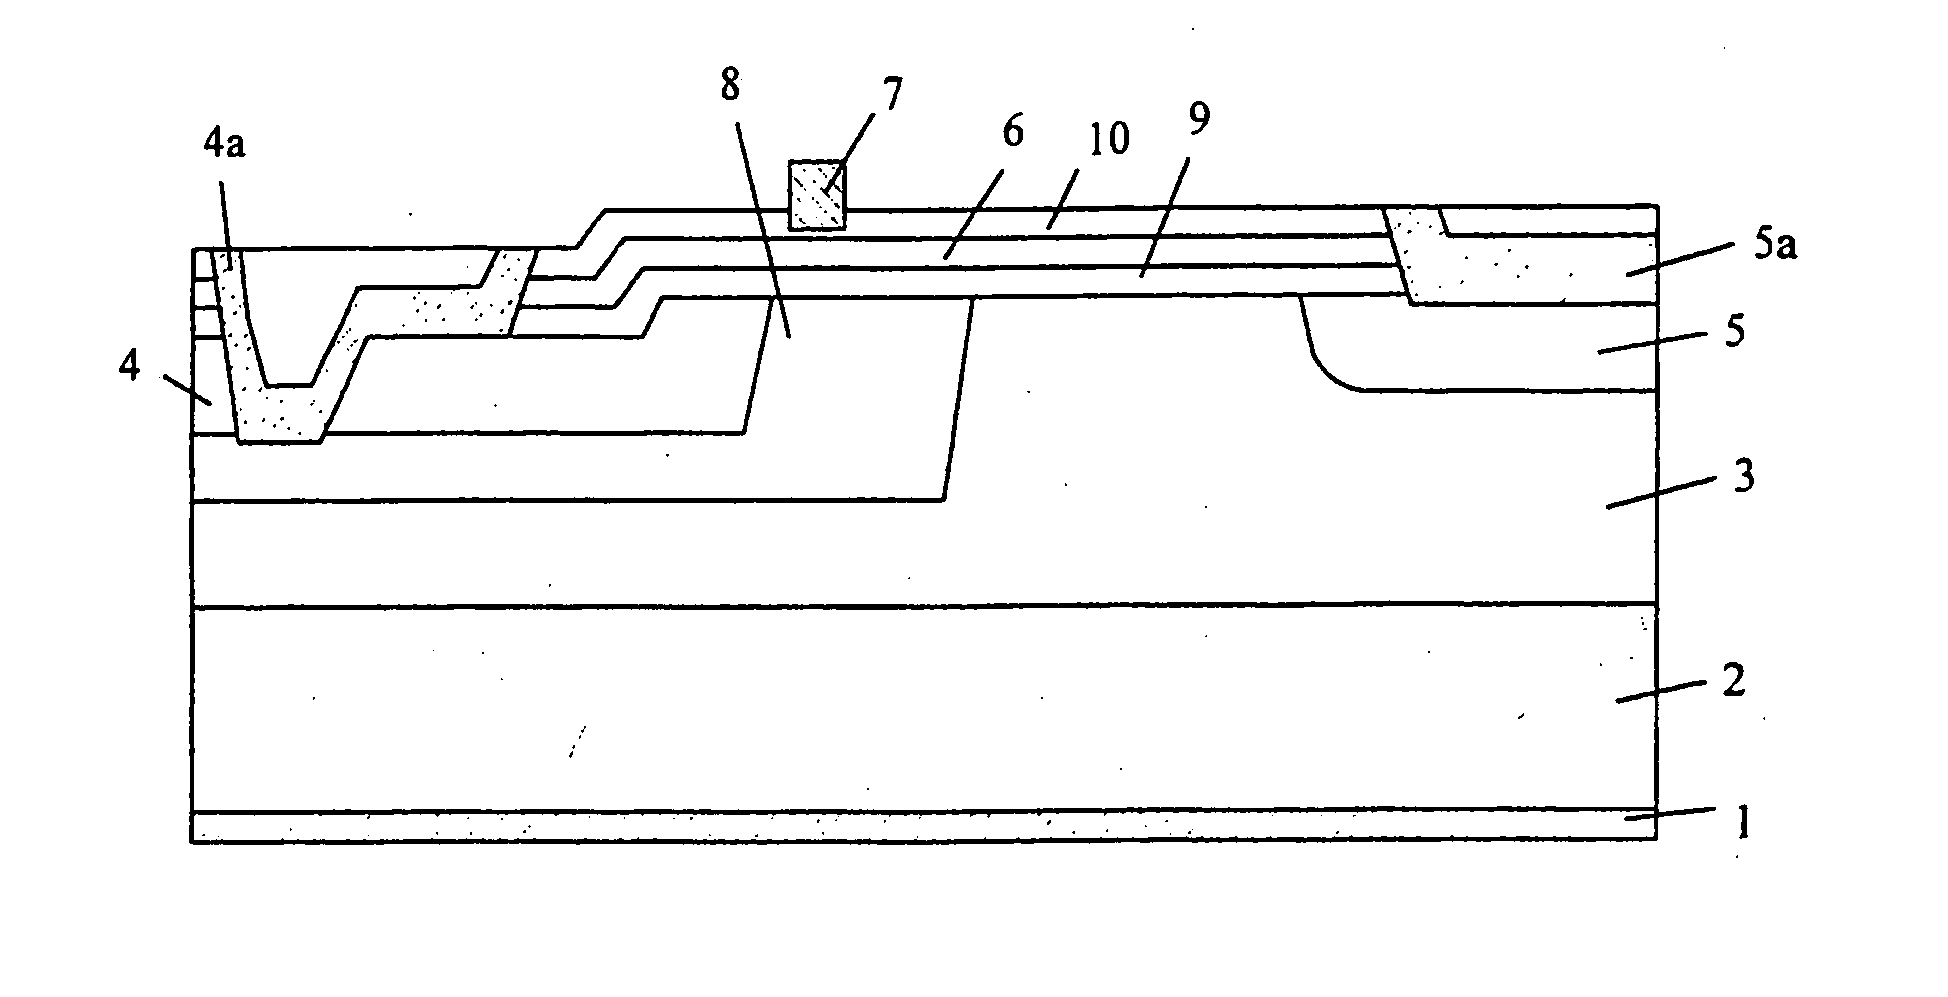 Lateral Field Effect Transistor and Its Fabrication Comprising a Spacer Layer Above and Below the Channel Layer